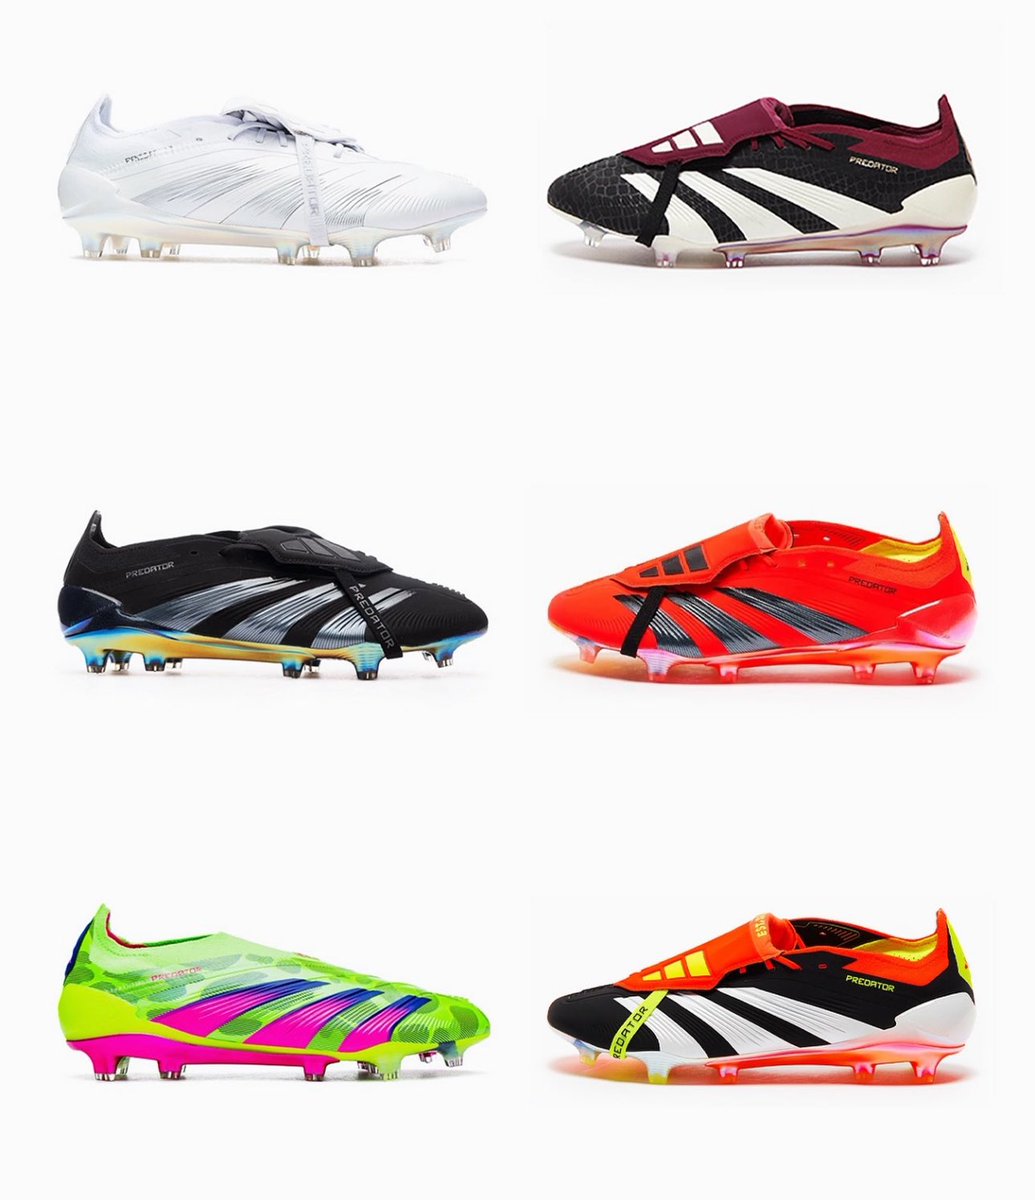 The orange ones are my favorite .. which one is your favorite ? @adidassoccer